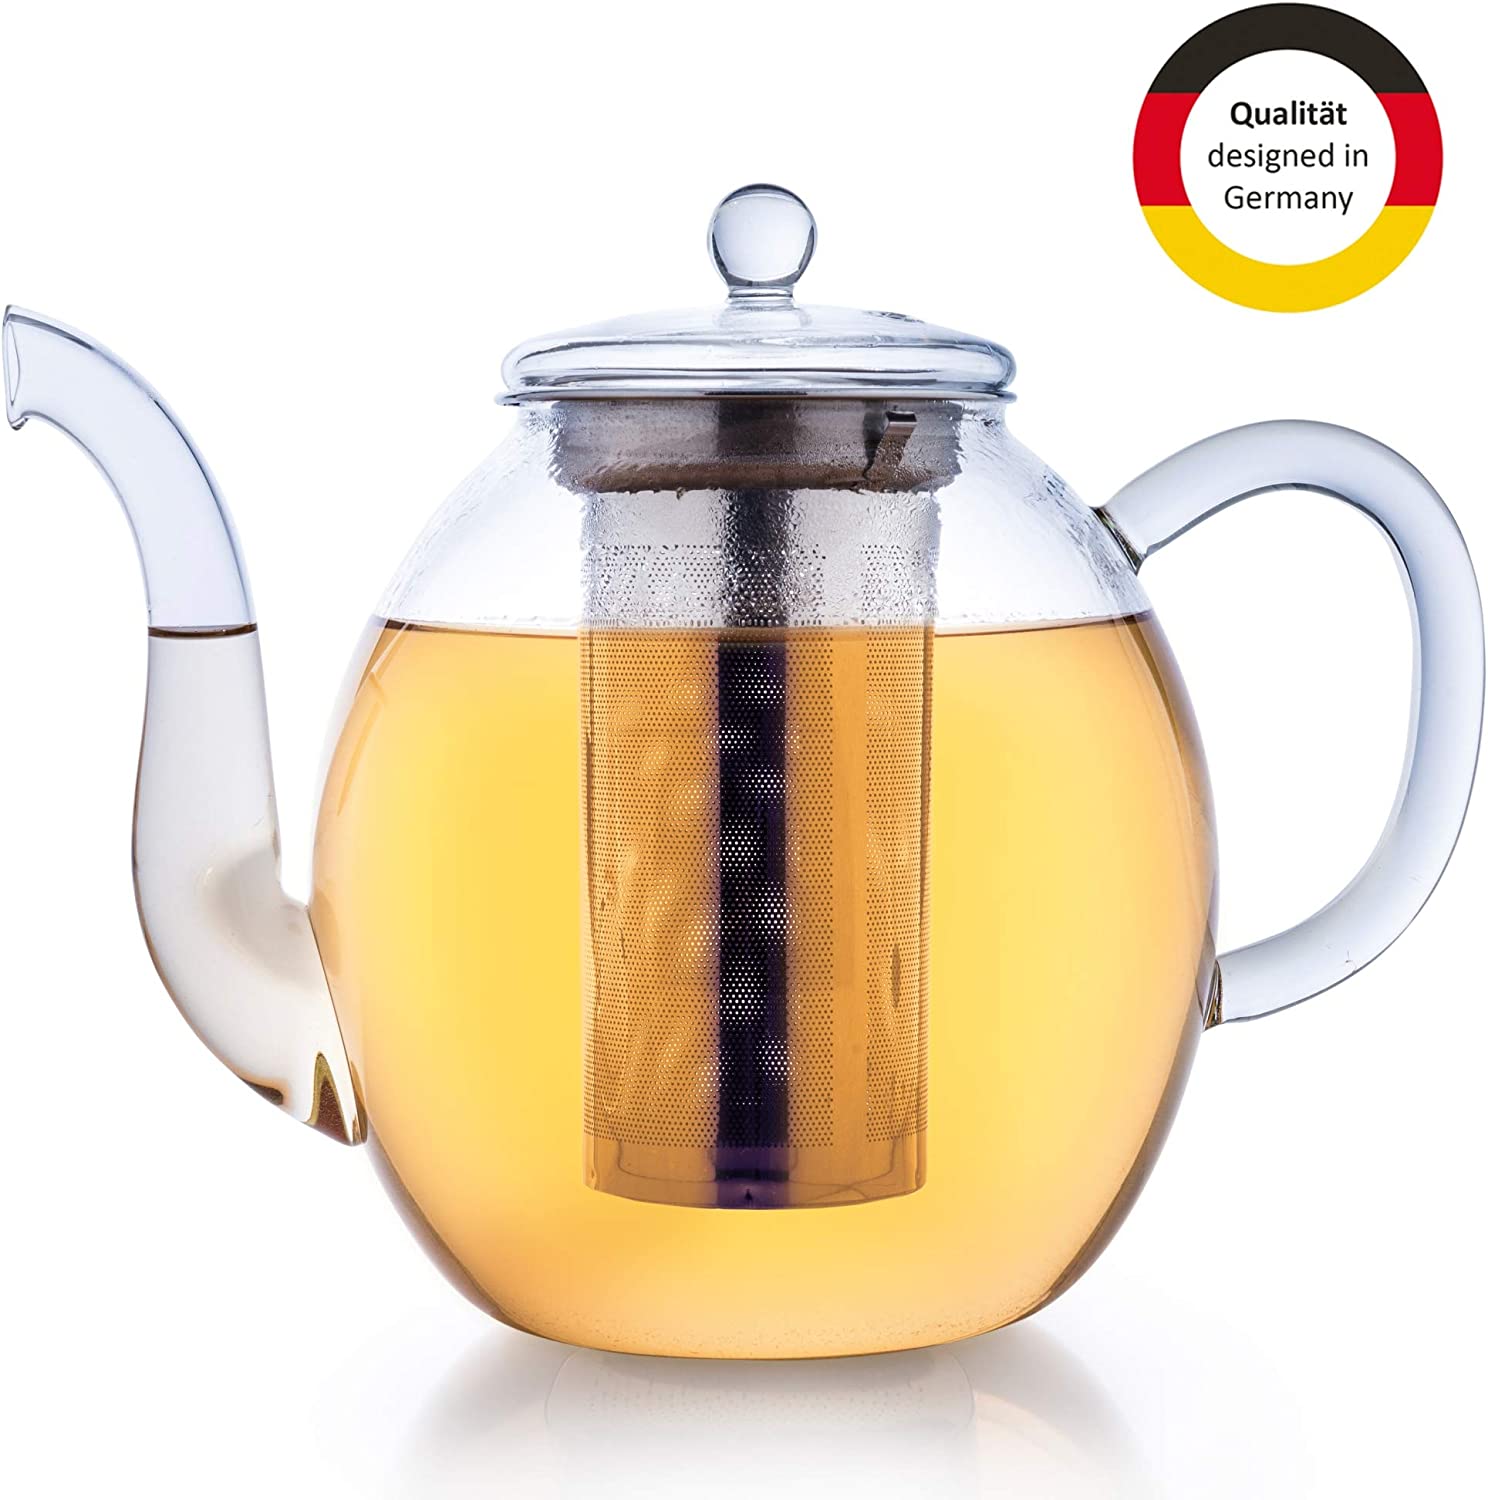 Creano teapot (high type) tested in 2022